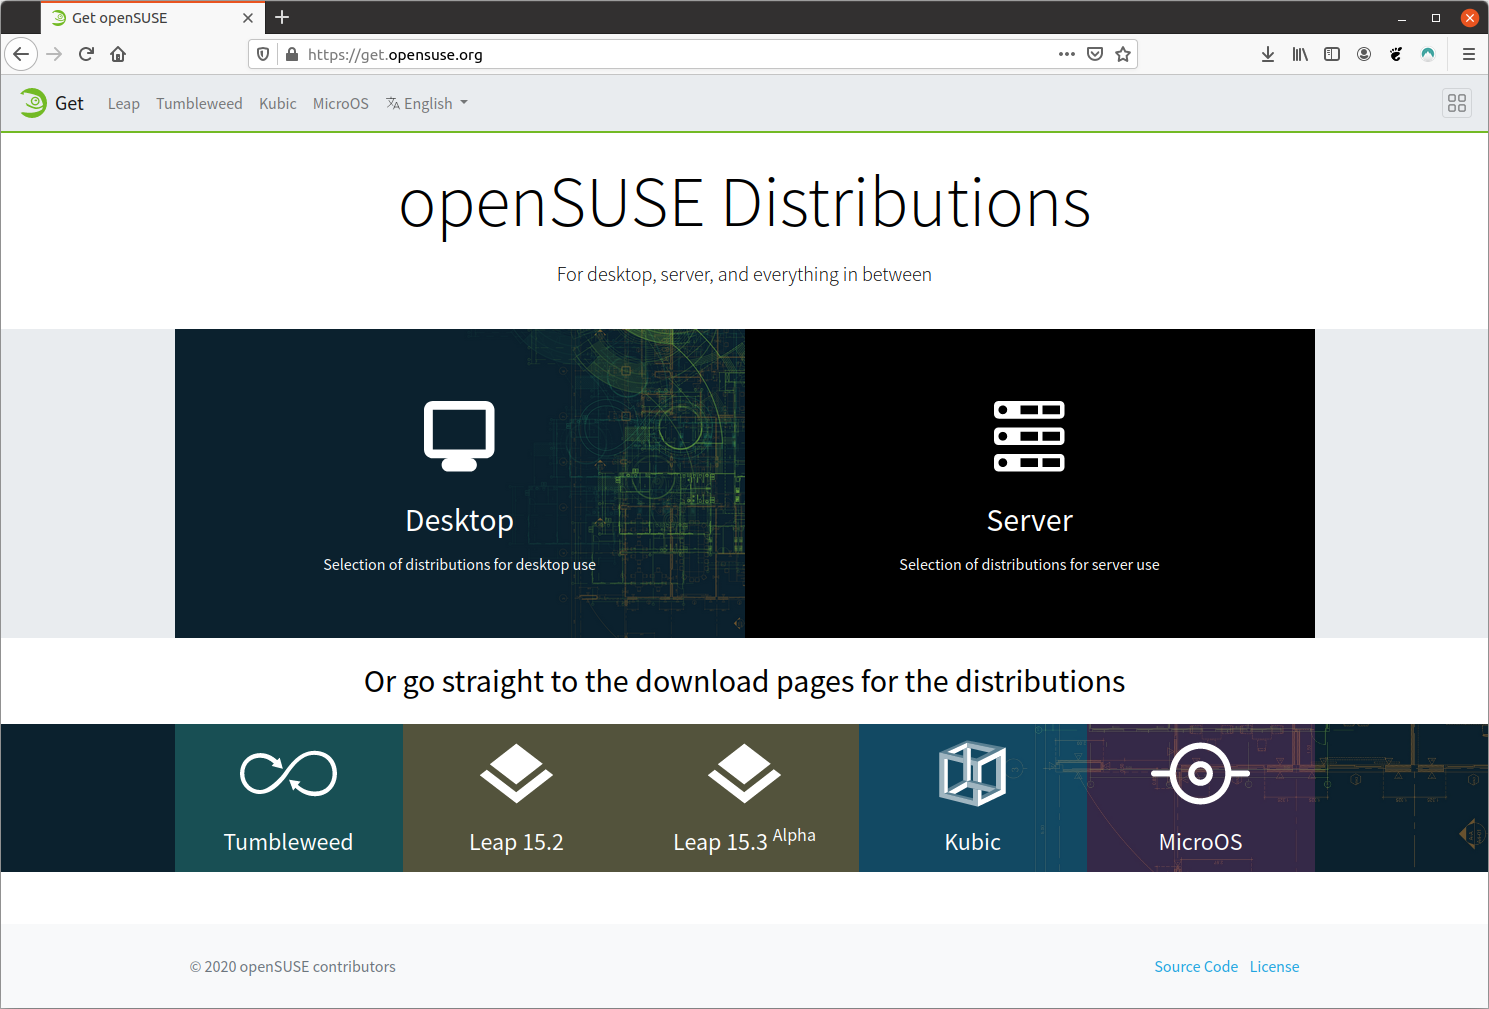 openSUSE distributions dedicated page